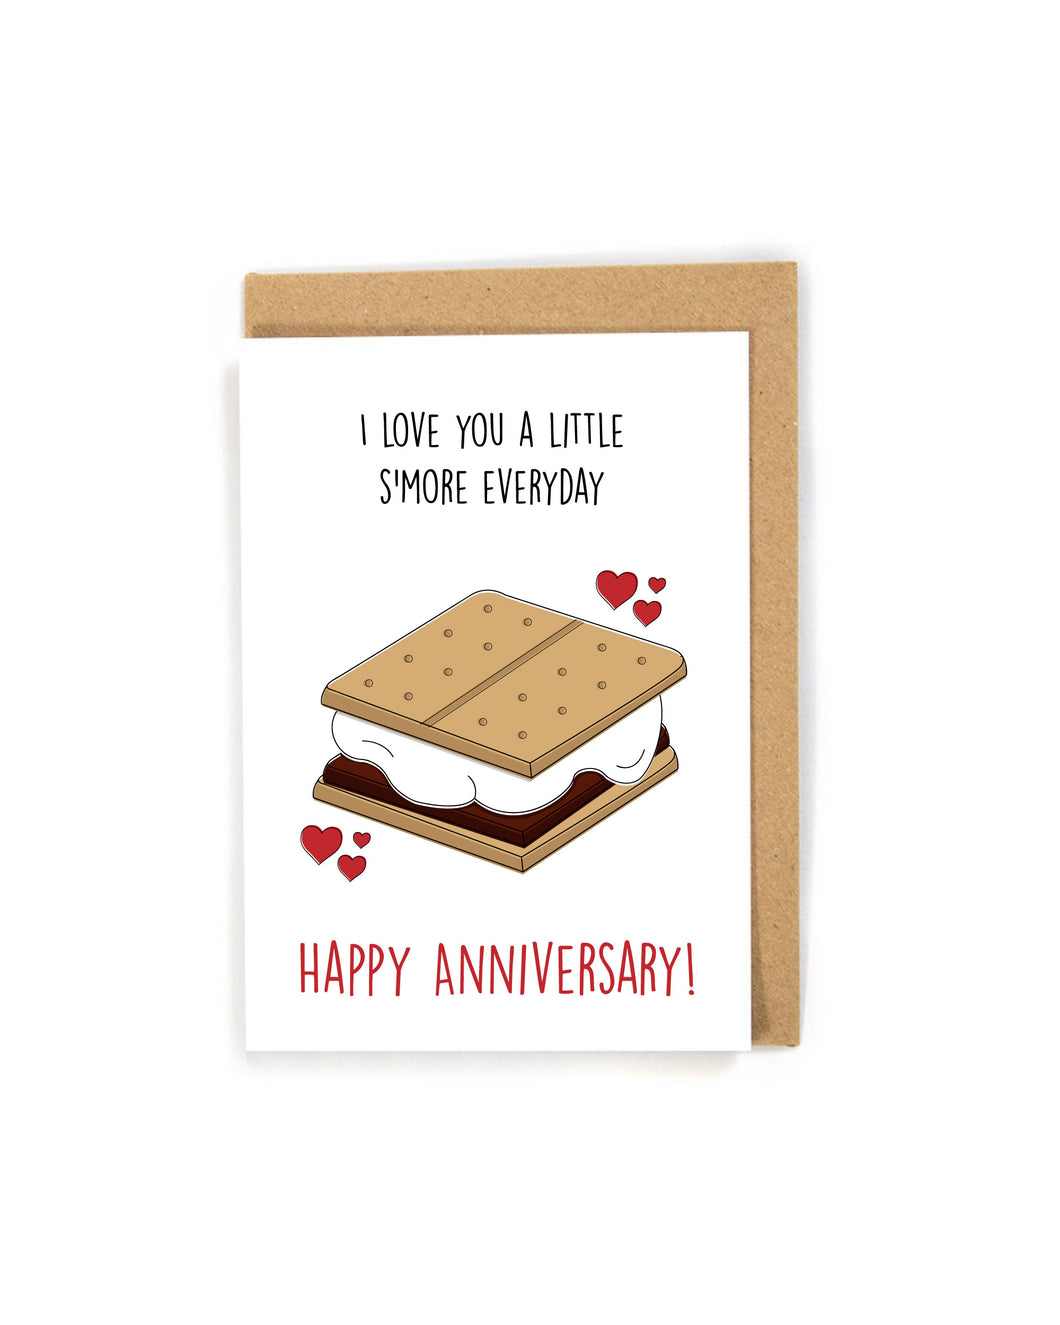 Smores Anniversary Card for Spouse